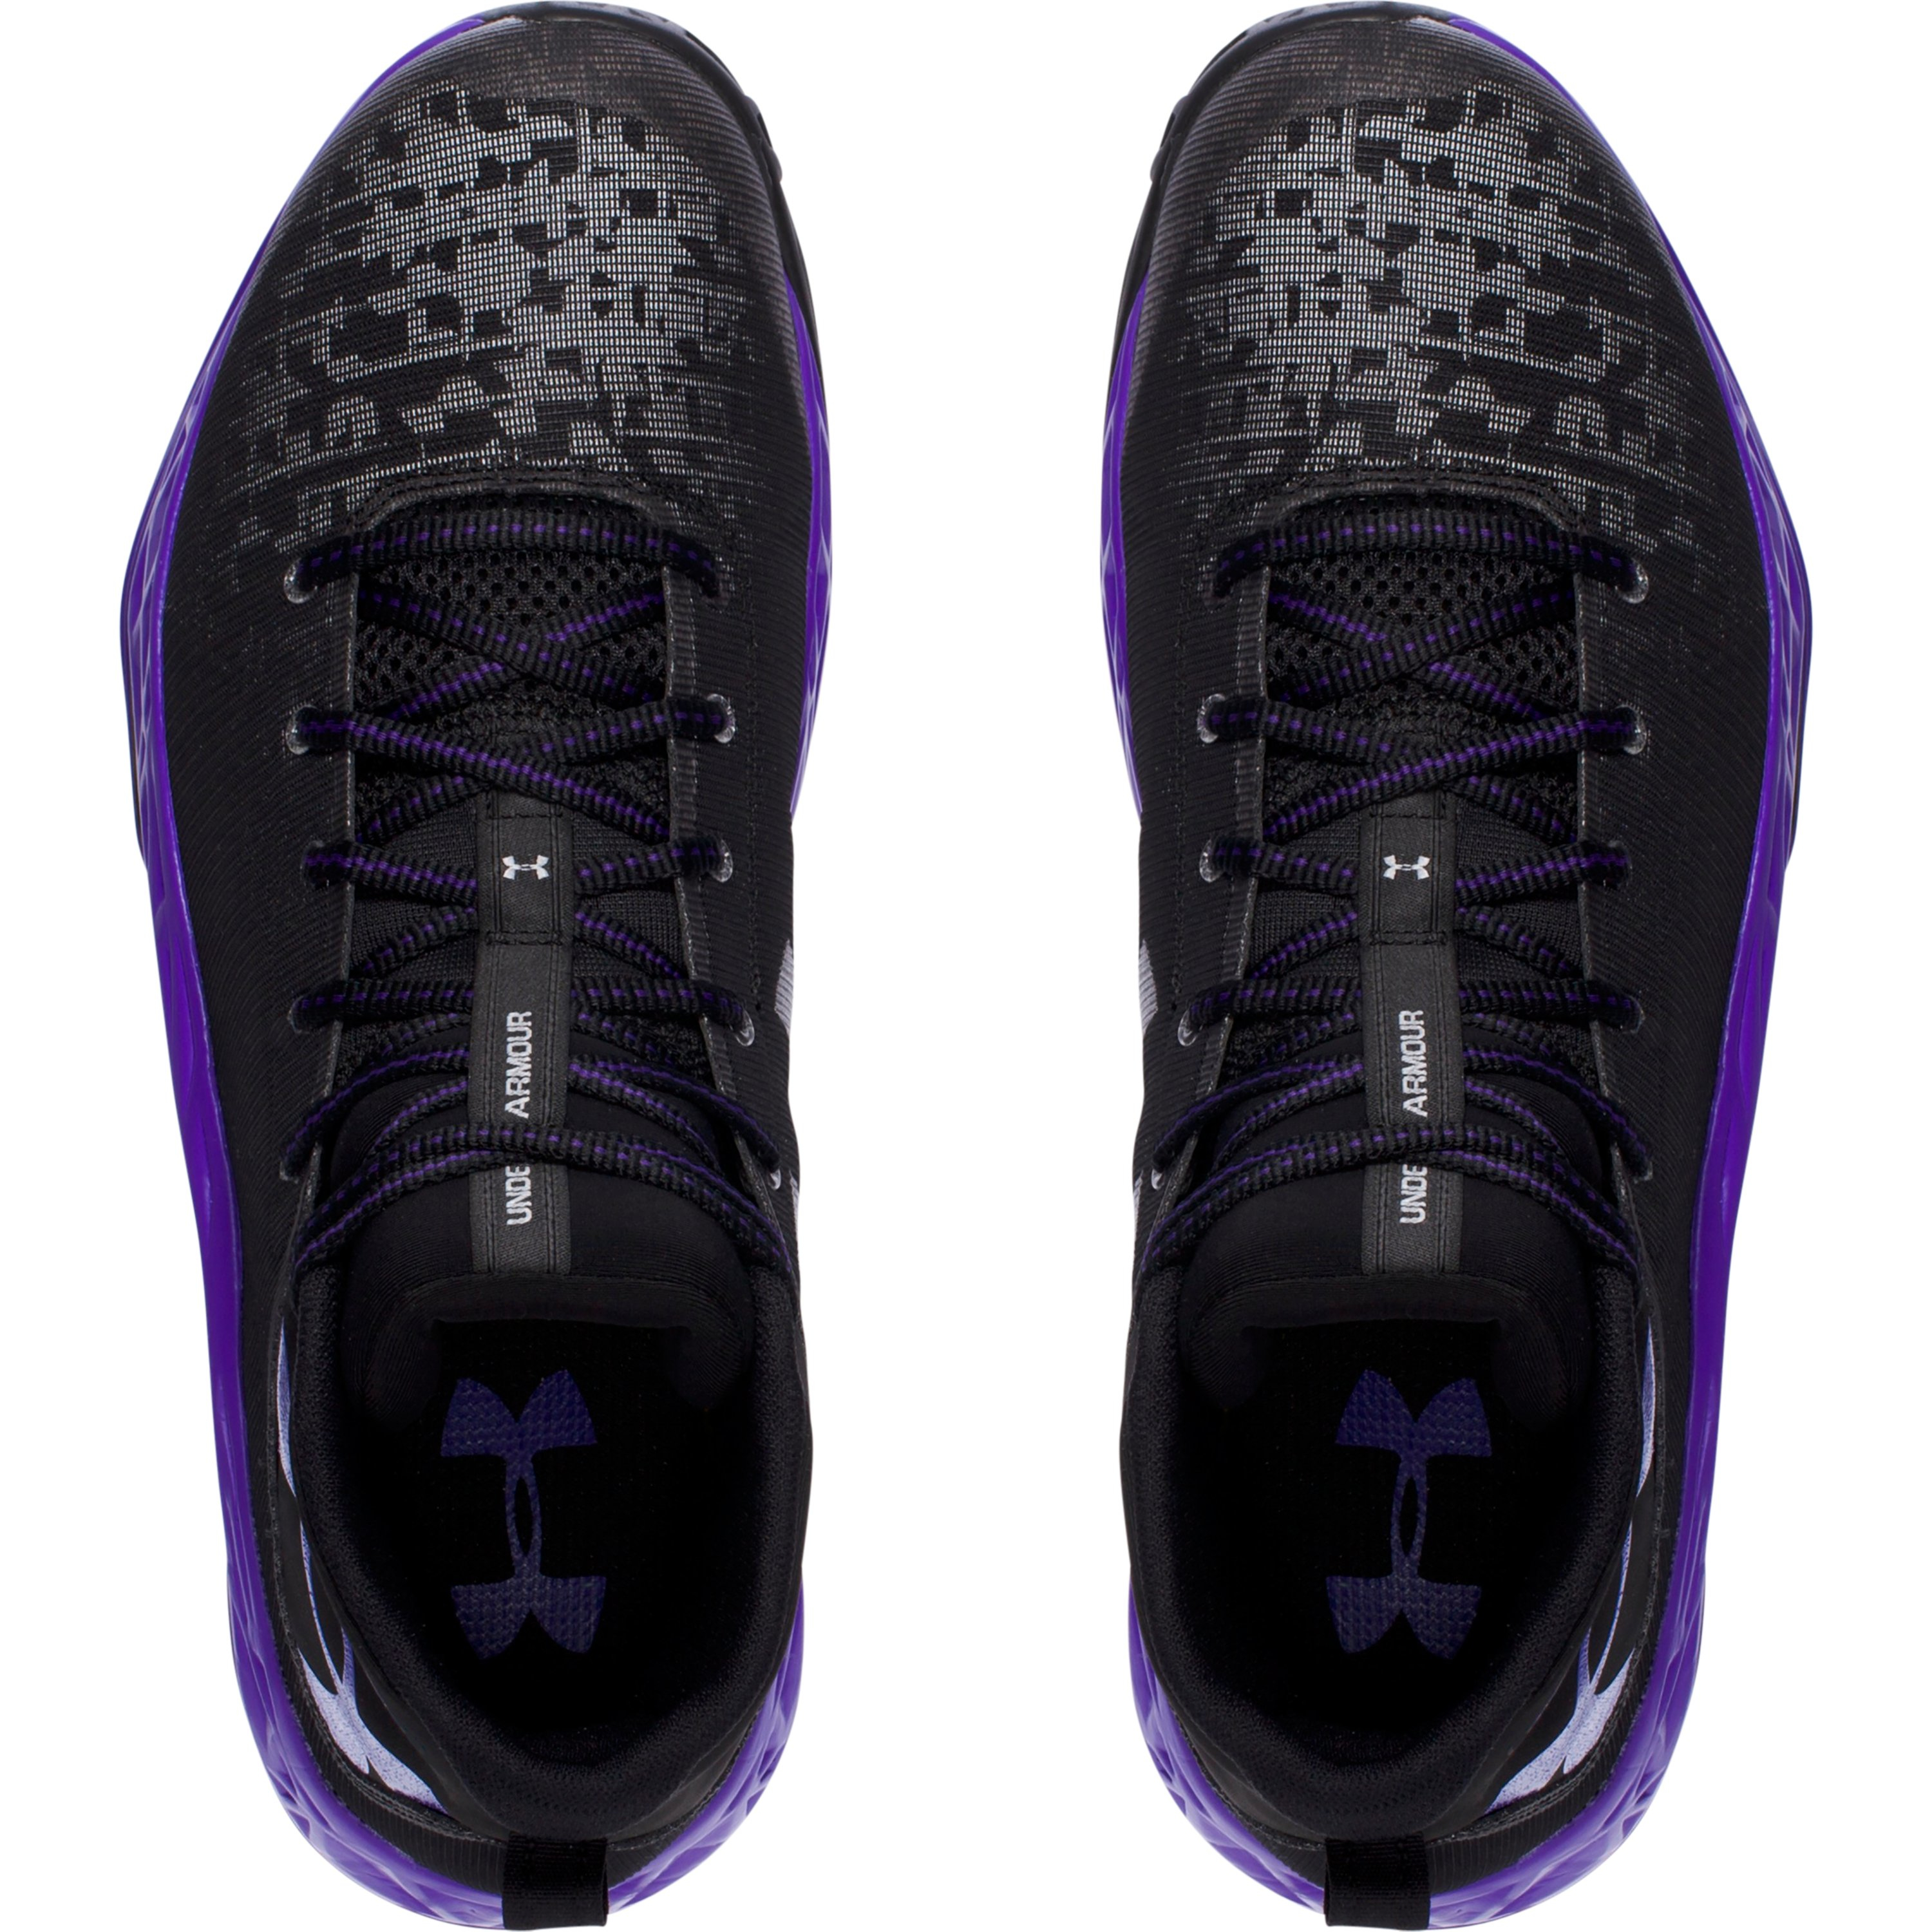 Lyst - Under Armour Men's Ua Fireshot Basketball Shoes in Purple for Men